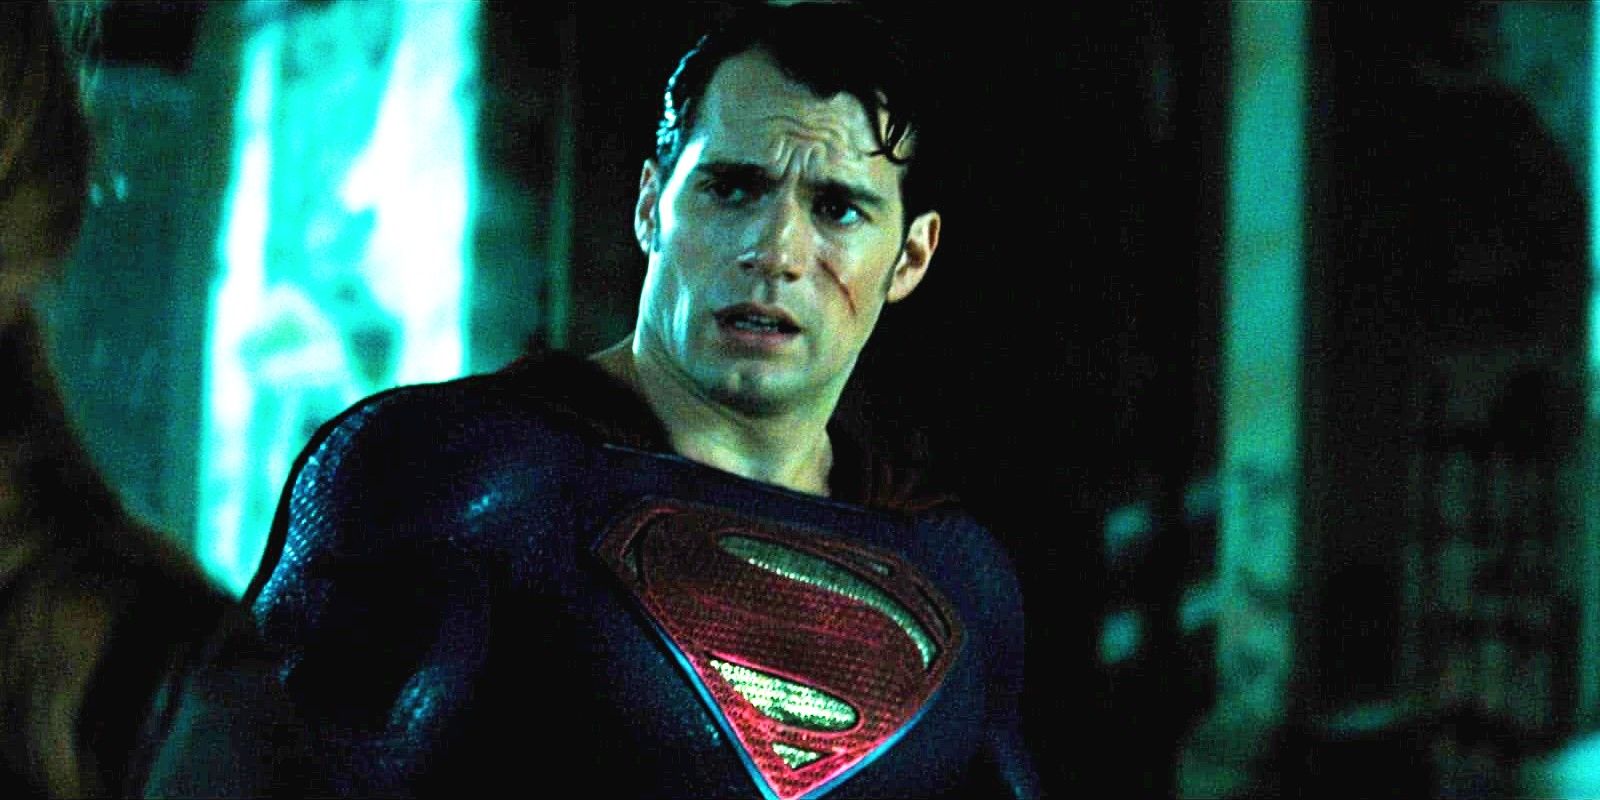 Henry Cavill reveals he's been FIRED from Superman role just two